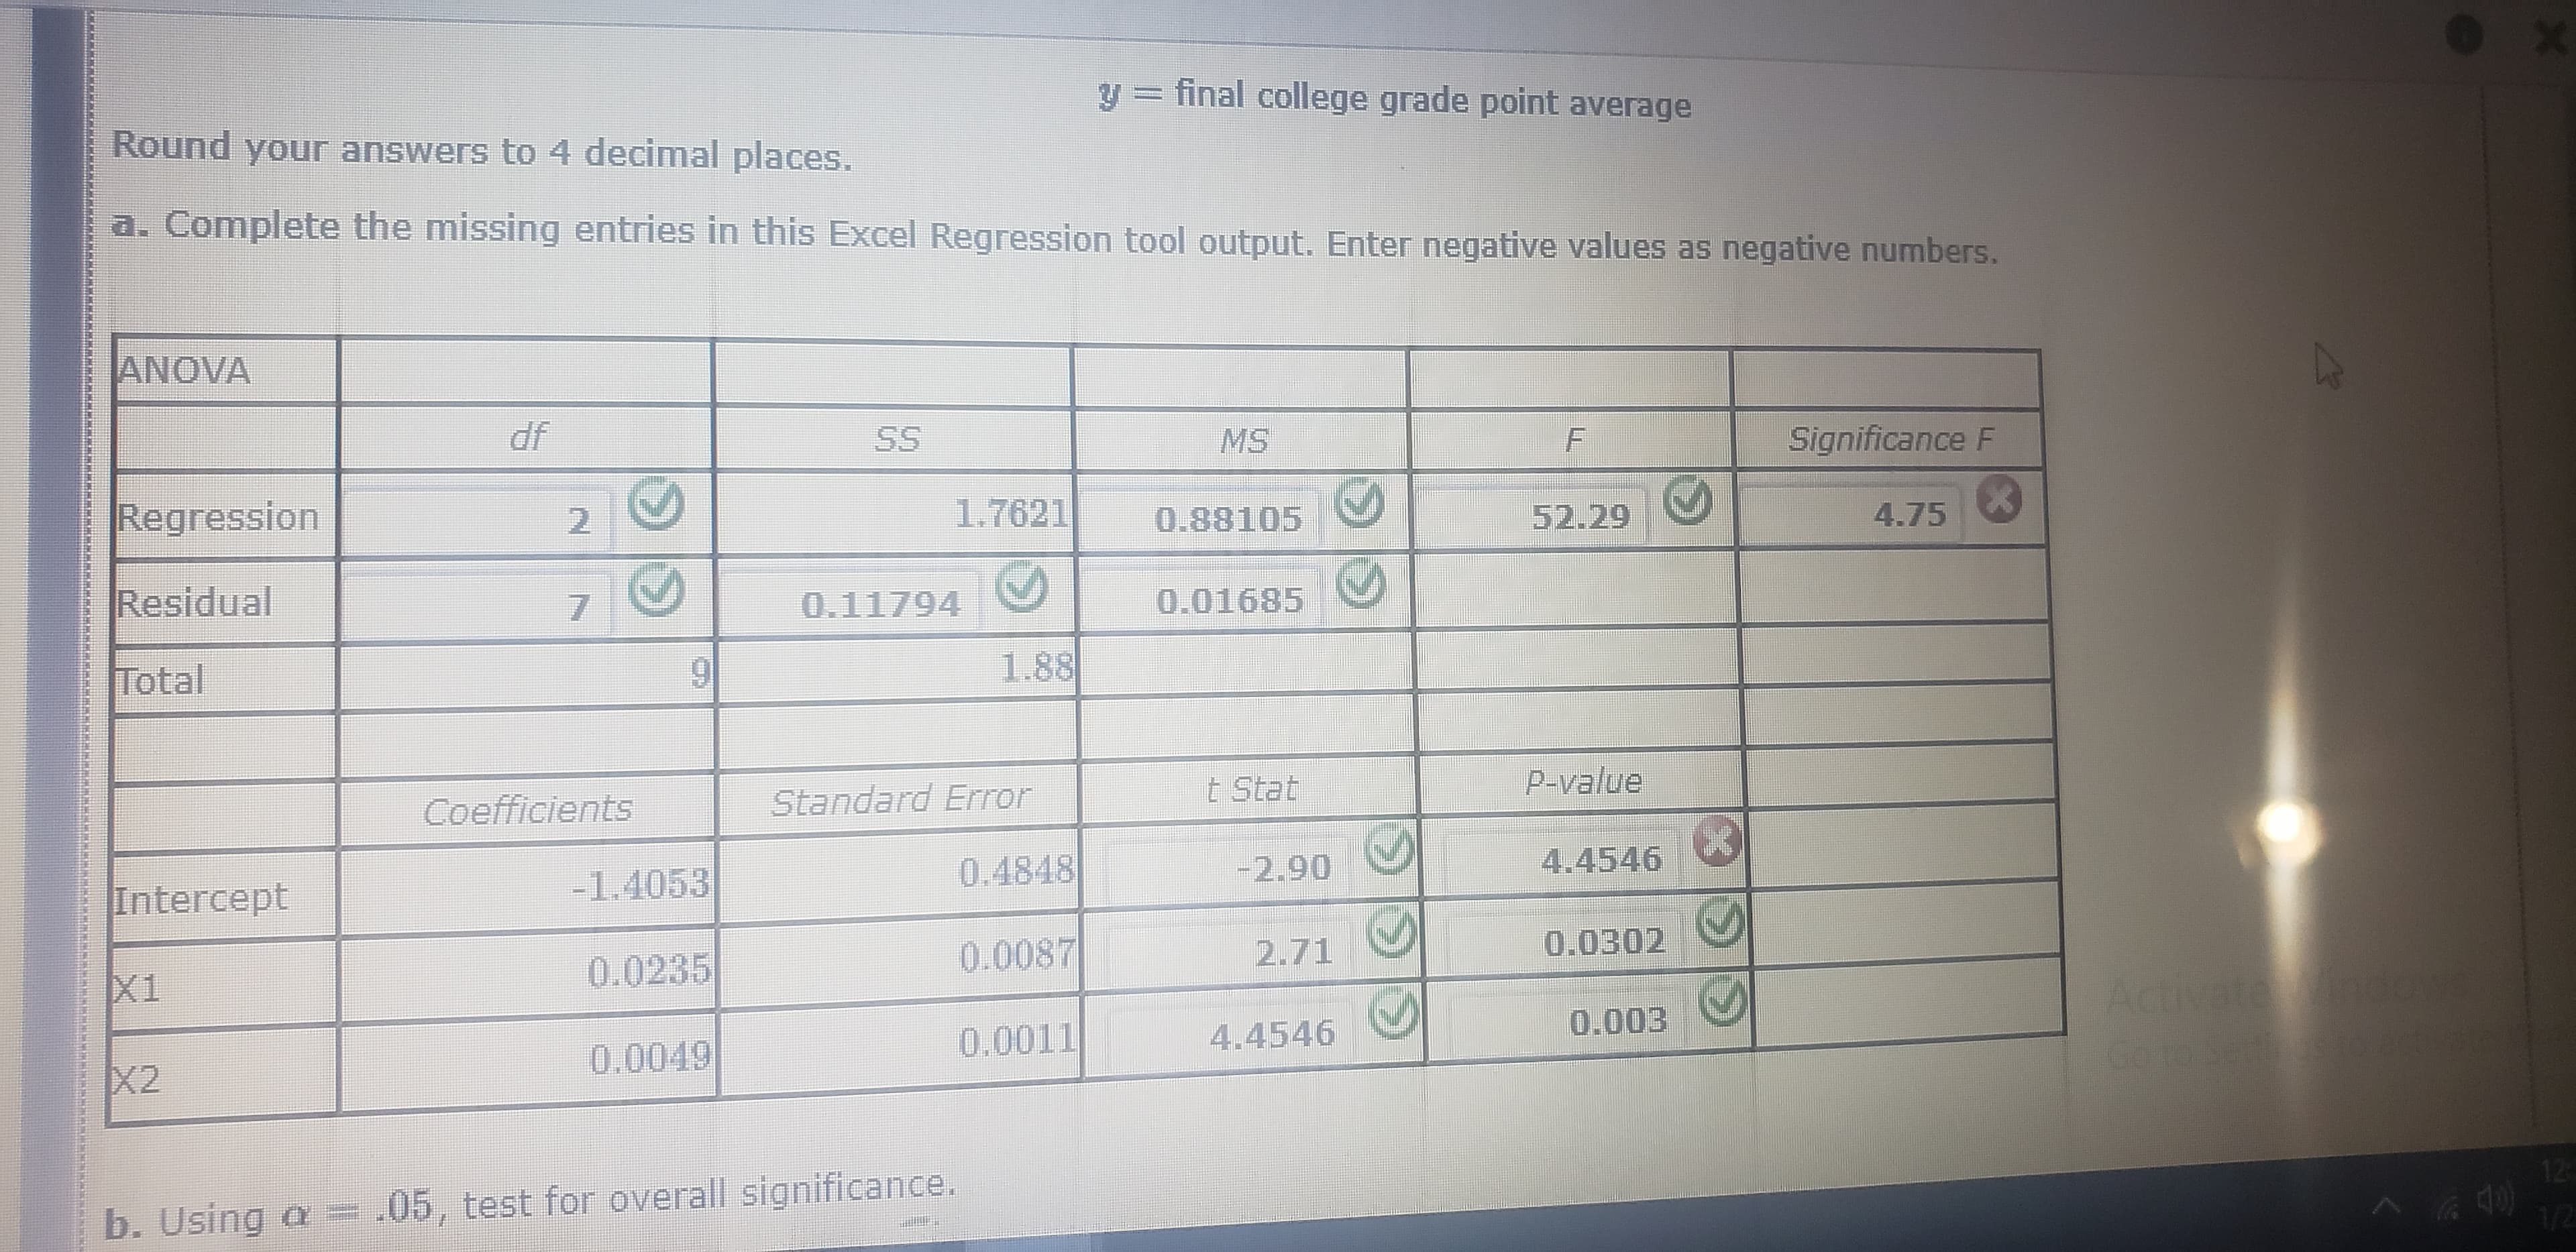 y = final college grade point average
Round your answers to 4 decimal places.
a. Complete the missing entries in this Excel Regression tool output. Enter negative values as negative numbers.
ANOVA
df
SS
Significance F
Regression
1.7621
52.29
0.88105
4.75
2.
Residual
0.01685
0.11794
7.
1.88
6.
Total
P-value
t Stat
Standard Error
Coefficients
4.4546
0.4848
-2.90
-1.4053
Intercept
0.0302
0.0087
2.71
0.0235
Activatend
Go tobees.o
X1
0.003
4.4546
0.0011
0.0049
X2
124
.05, test for overall significance.
1/2
b. Using a=
